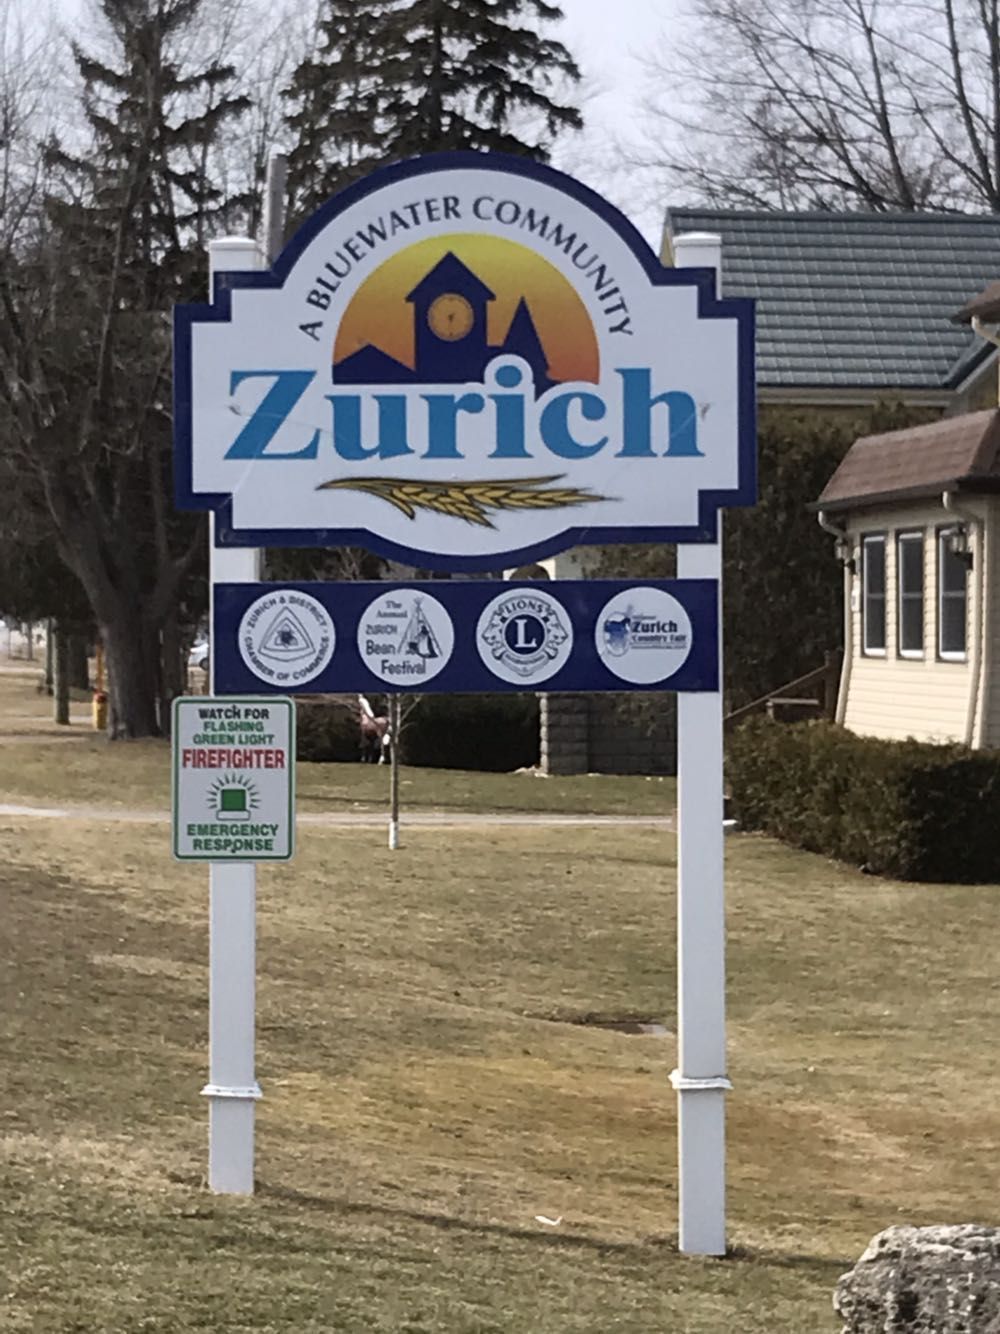 Zurich Ontario....not the other